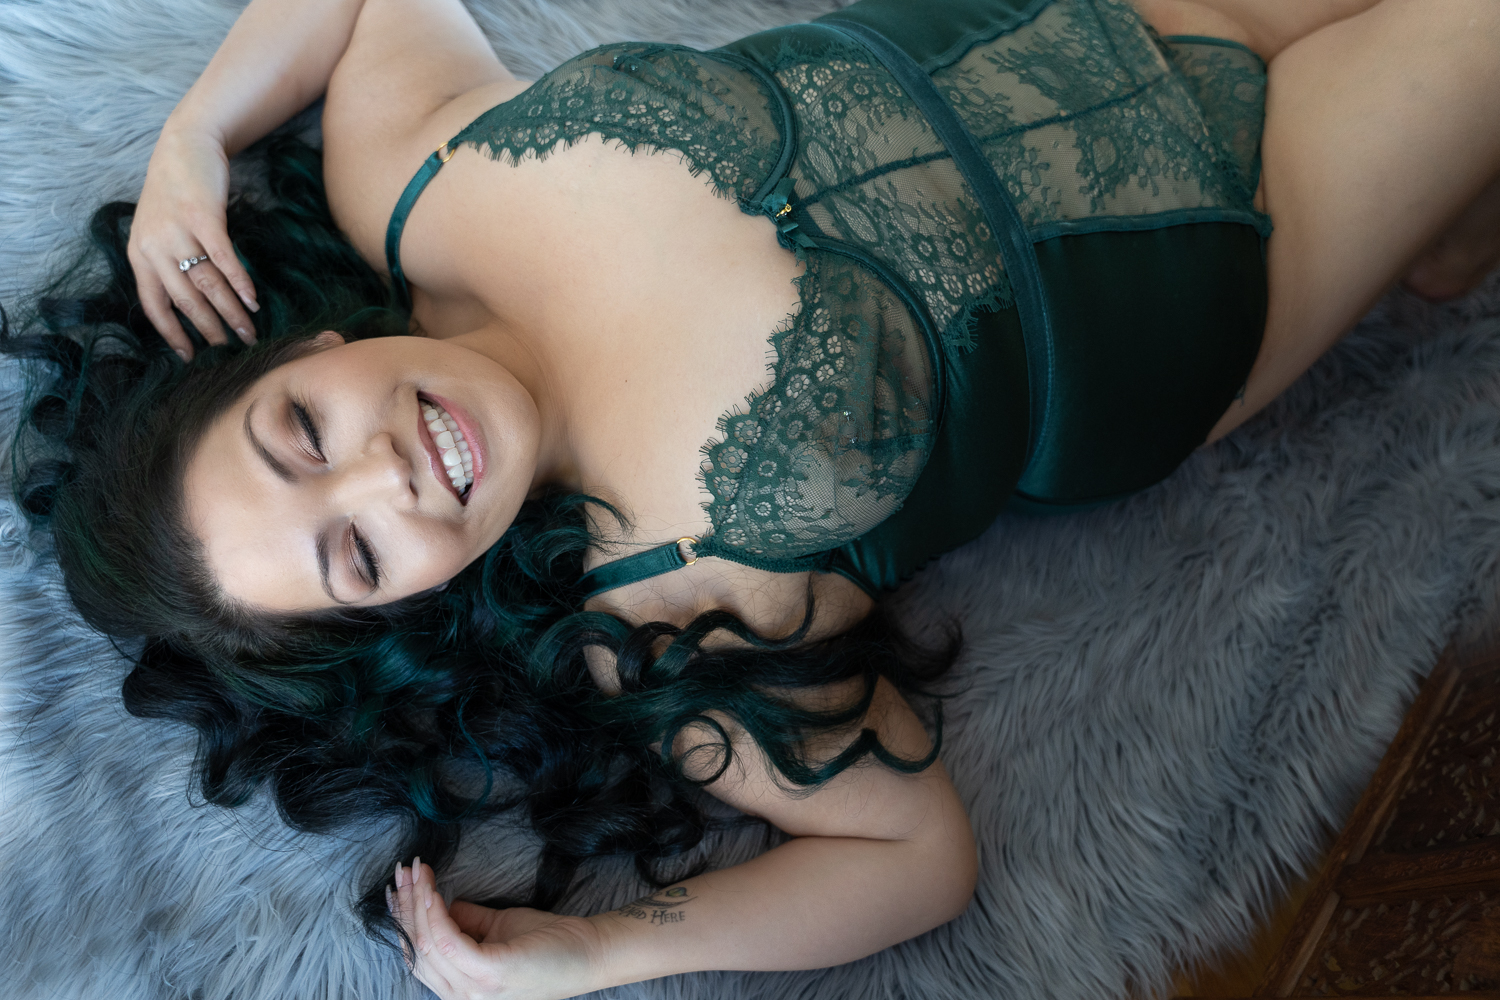 A woman with teal-tinted hair smiles joyfully, lying on a grey fur rug in a lacy green boudoir outfit, showcasing confidence and beauty in a relaxed pose